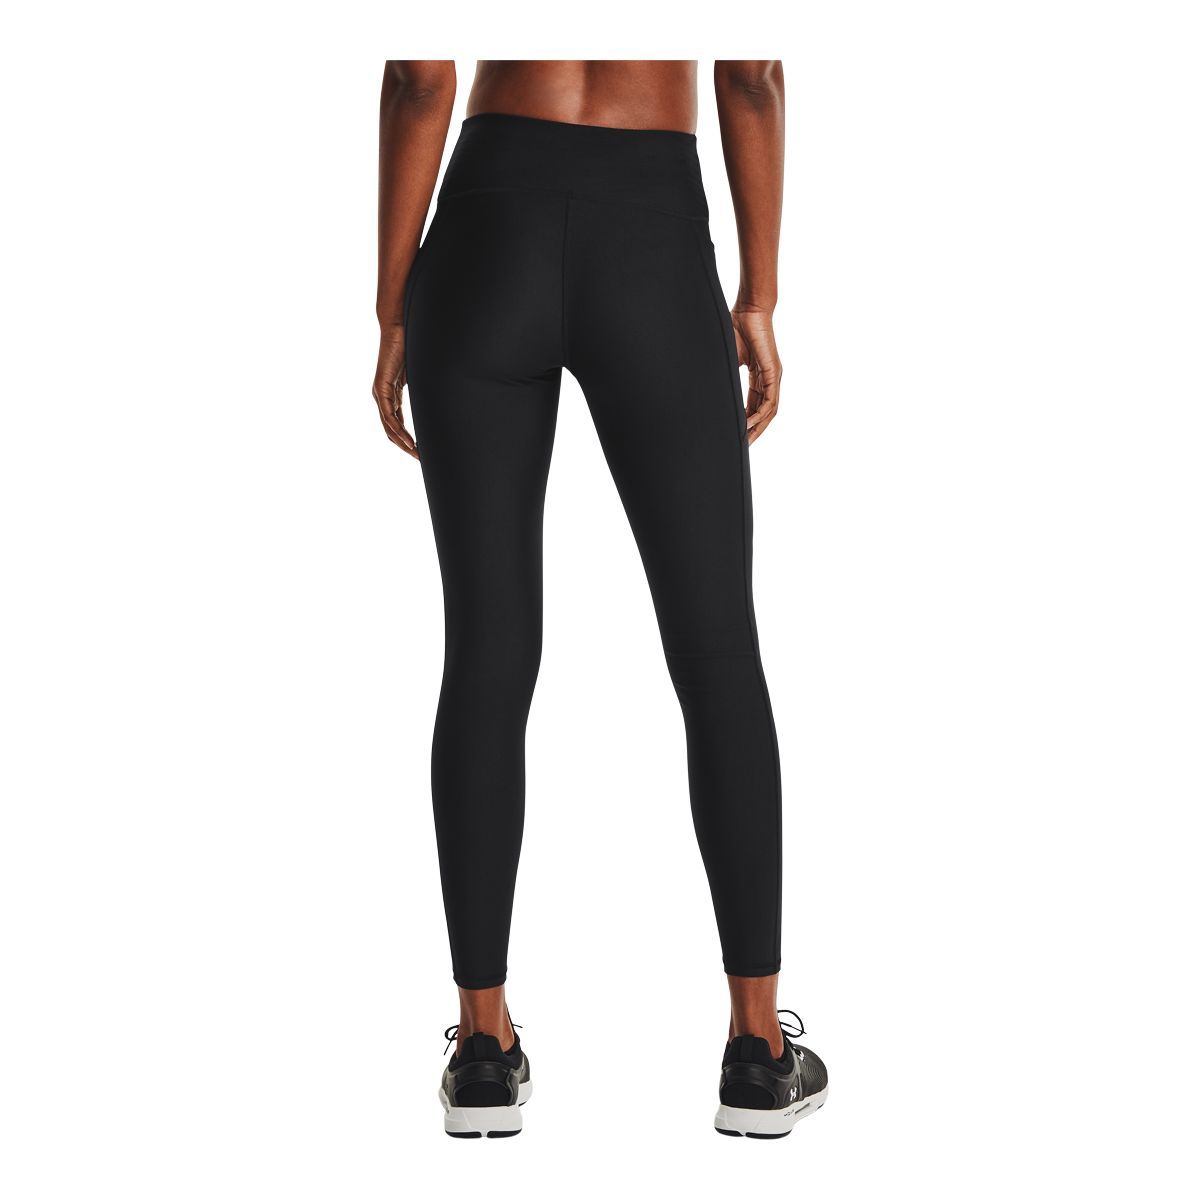 Under Armour - Superbase Powerprint Legging - Black Tights with Sports Tape